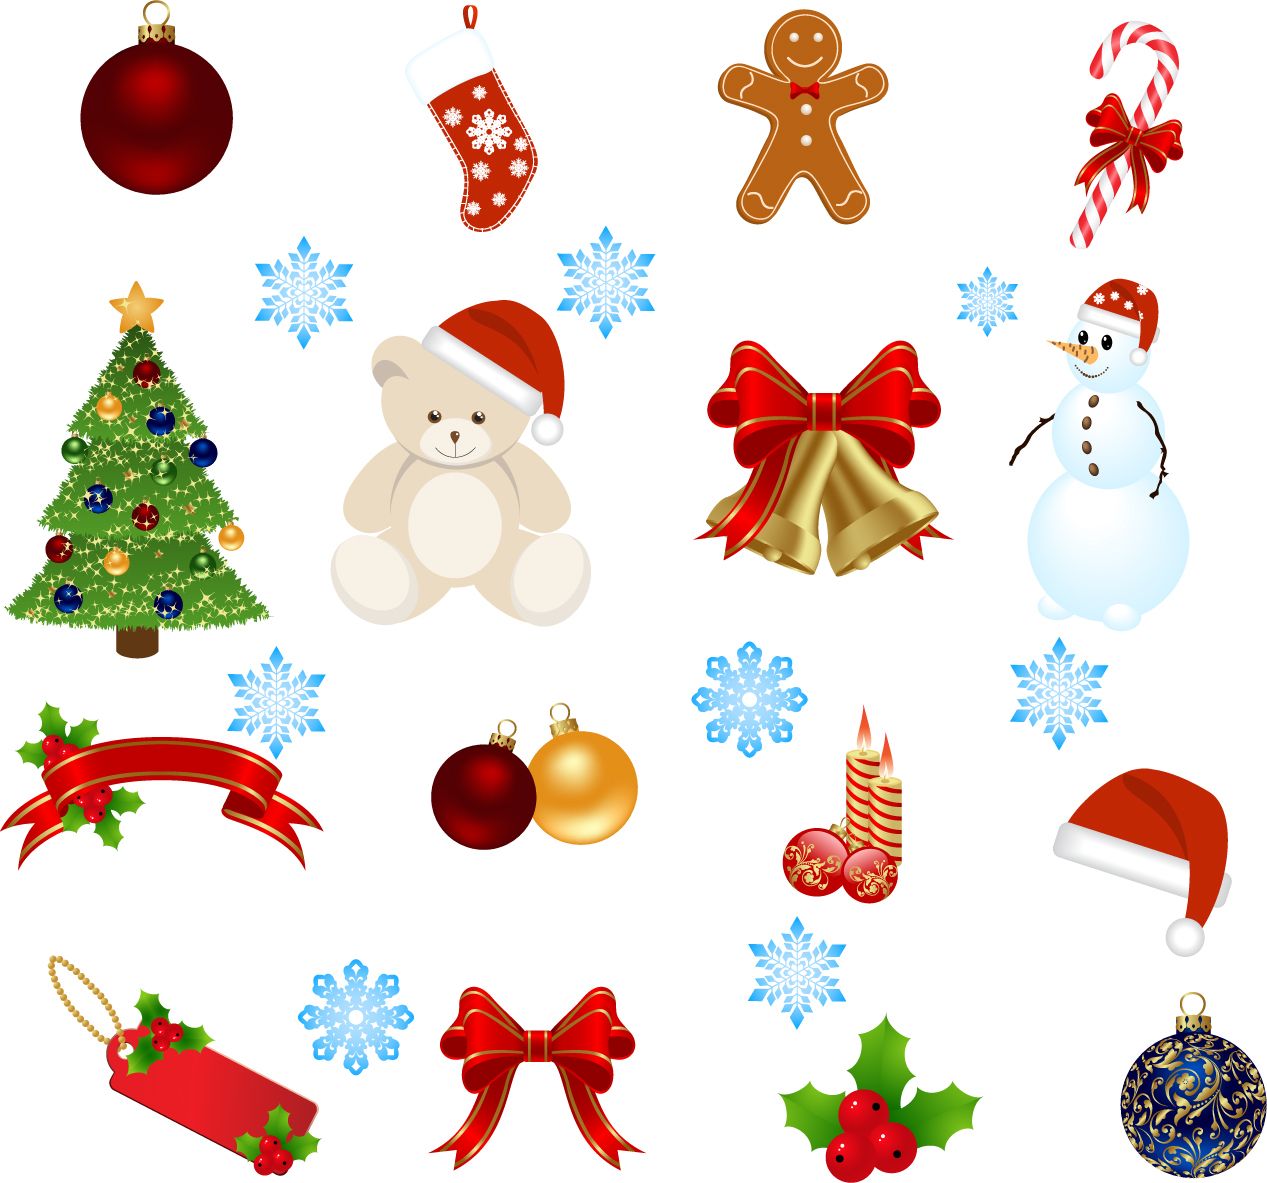 Free Christmas Cartoon Image Free, Download Free Clip Art, Free Clip Art on Clipart Library